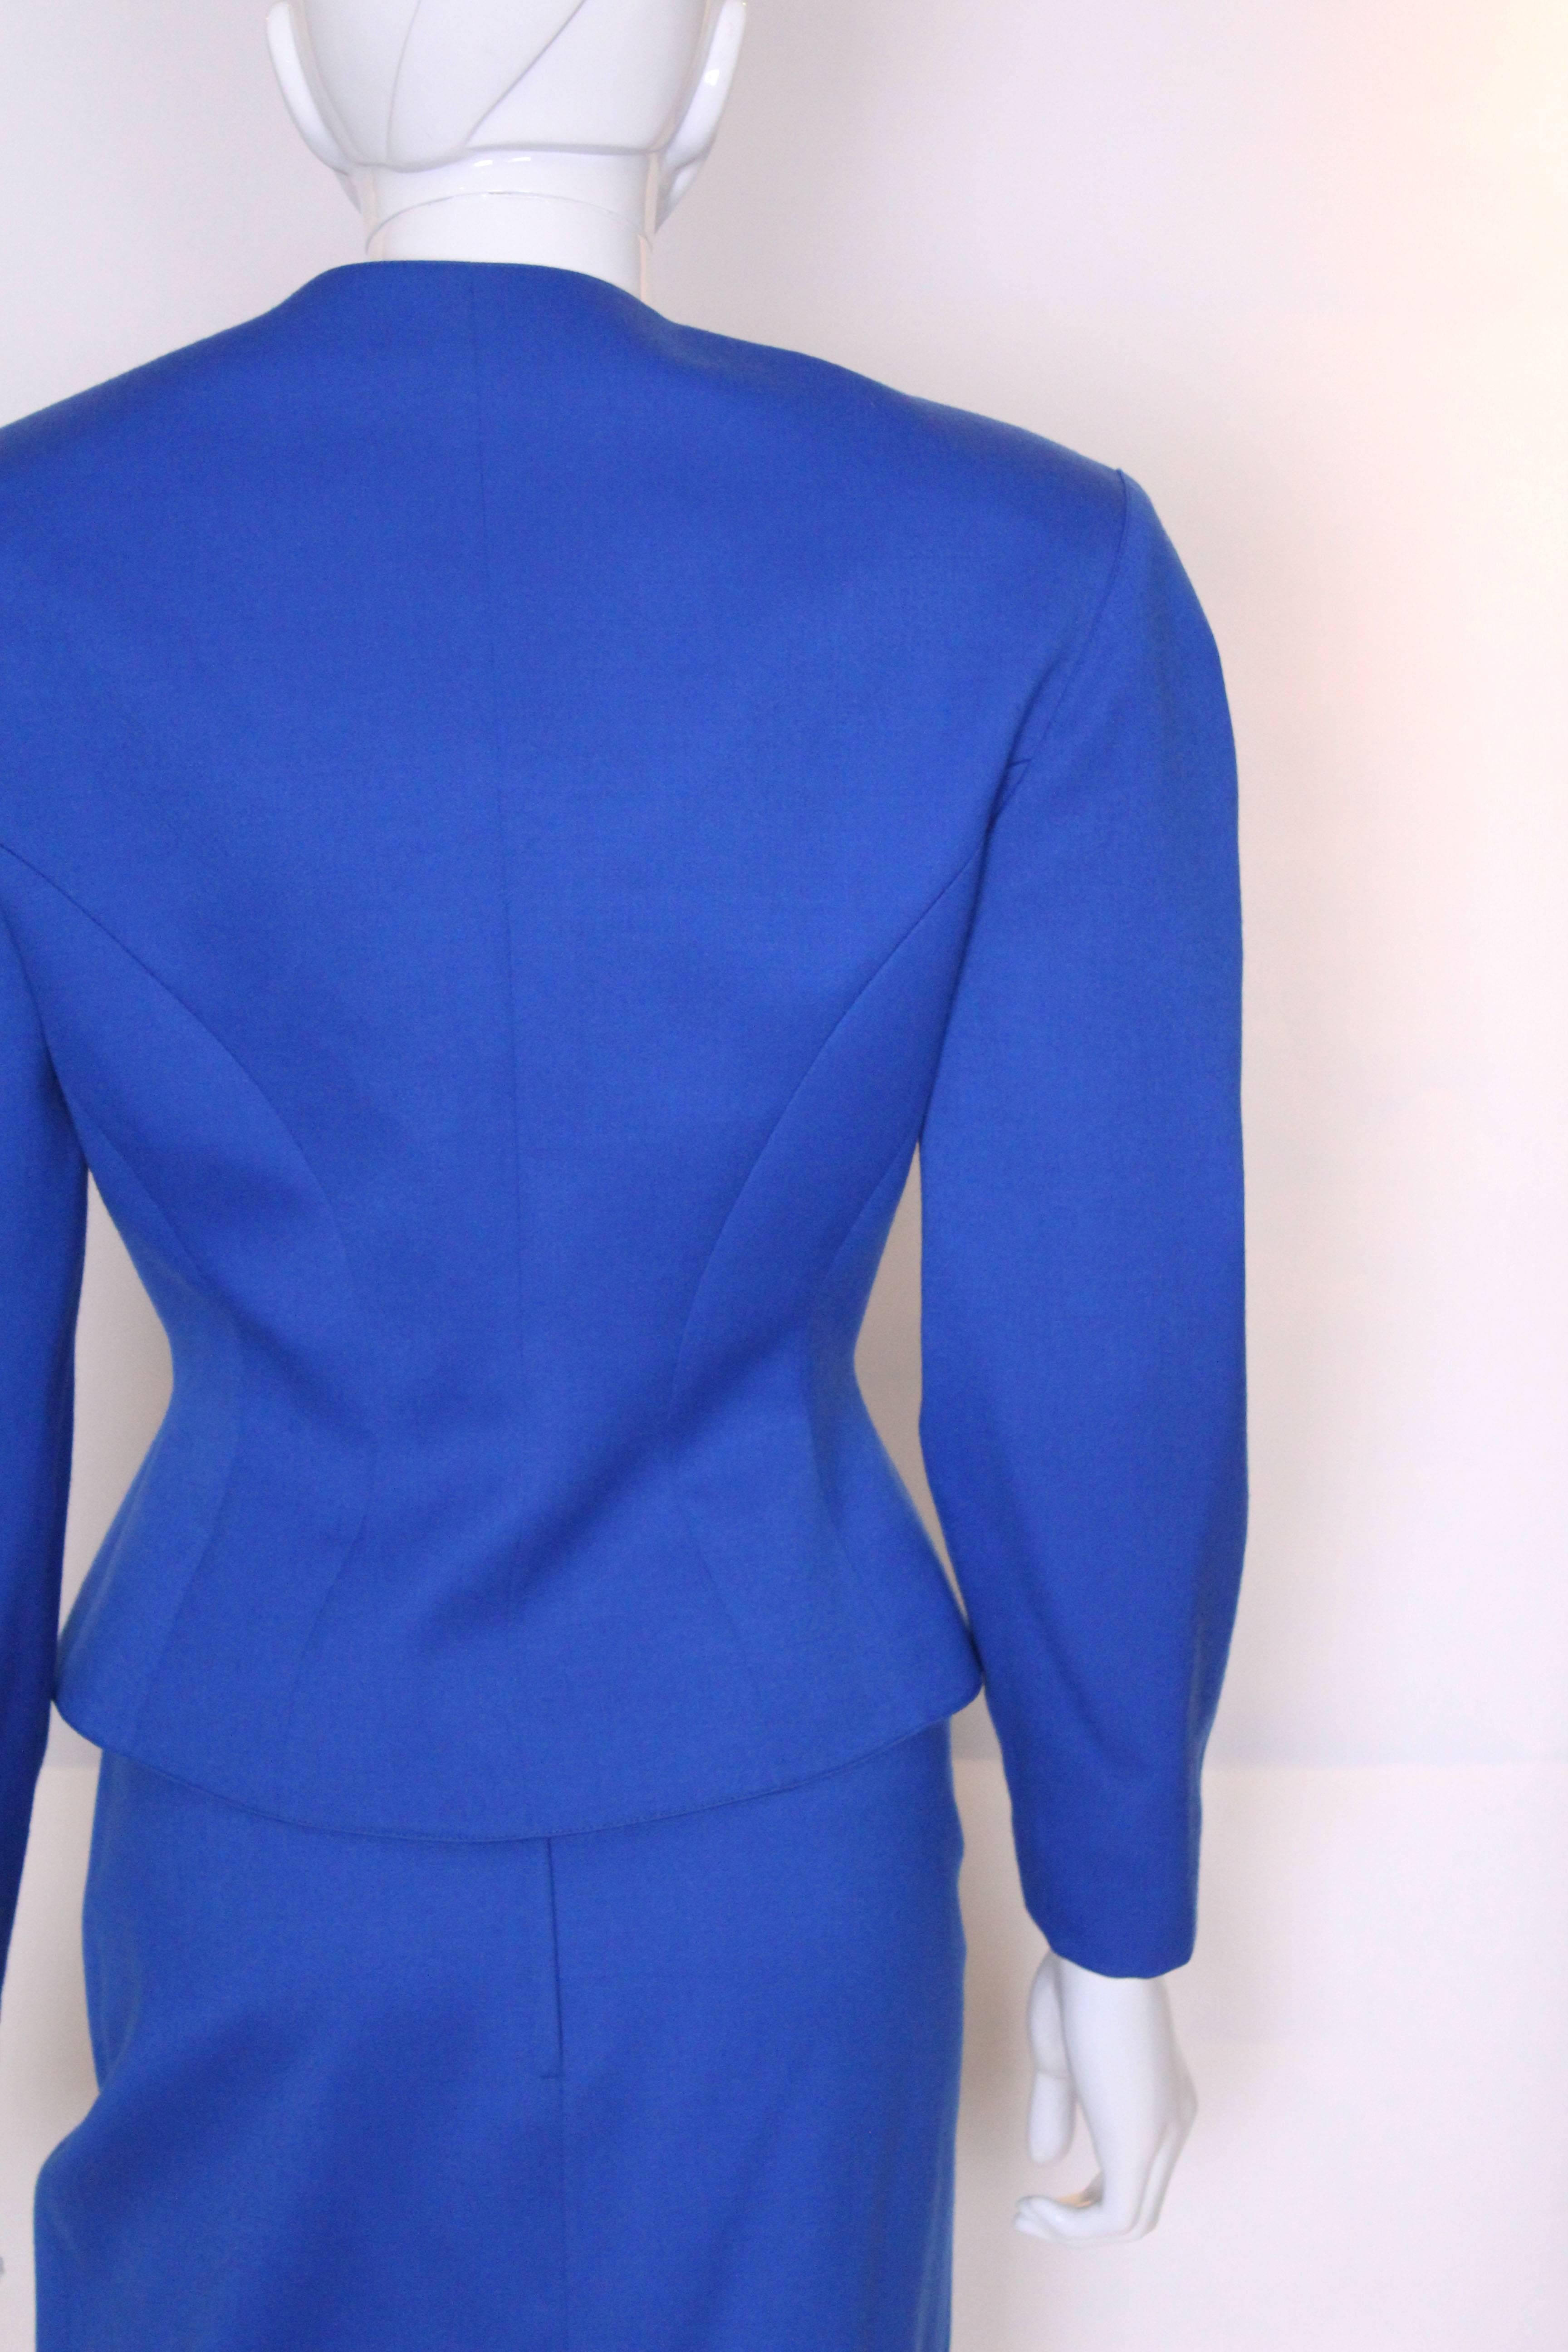 Vintage 1980s Electric Blue Suit jacket and skirt by Thierry Mugler 1